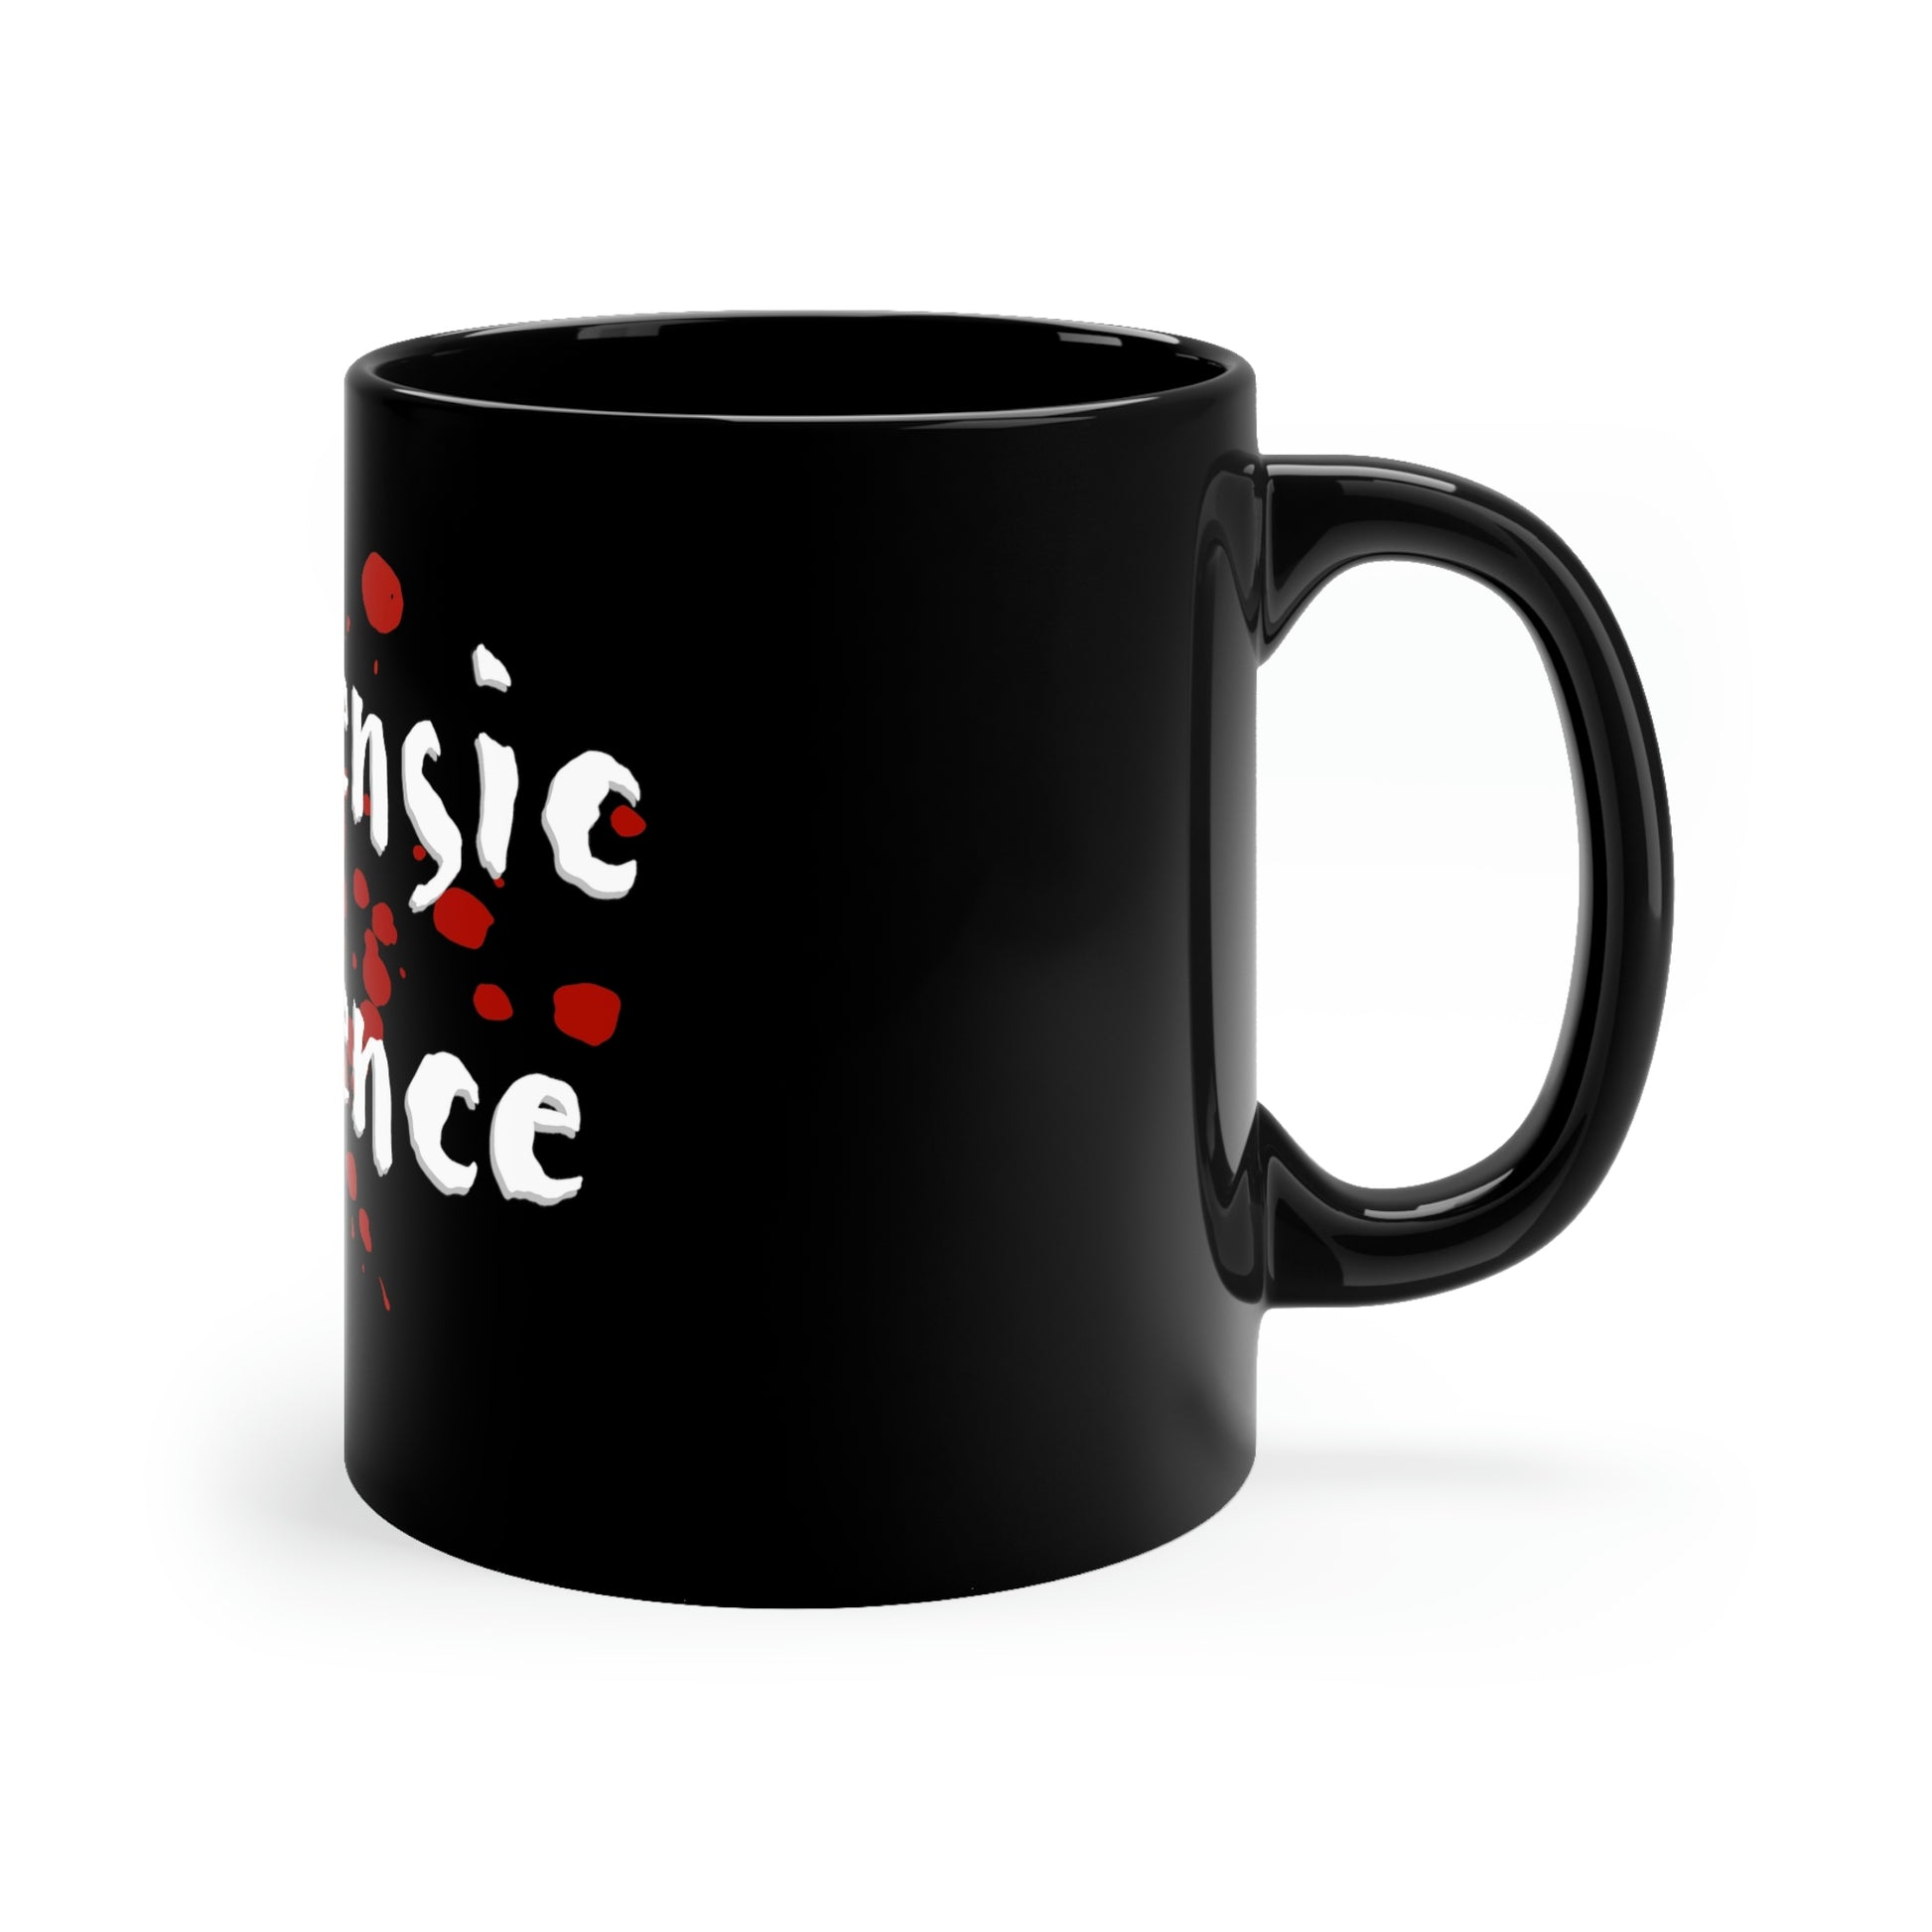 It’s BPA and lead-free, microwave and dishwasher-safe, and made of black durable ceramic in 11-ounce sizes. The high-quality sublimation printing makes this black ceramic mug the perfect gift for your true coffee, tea, or hot chocolate lover.